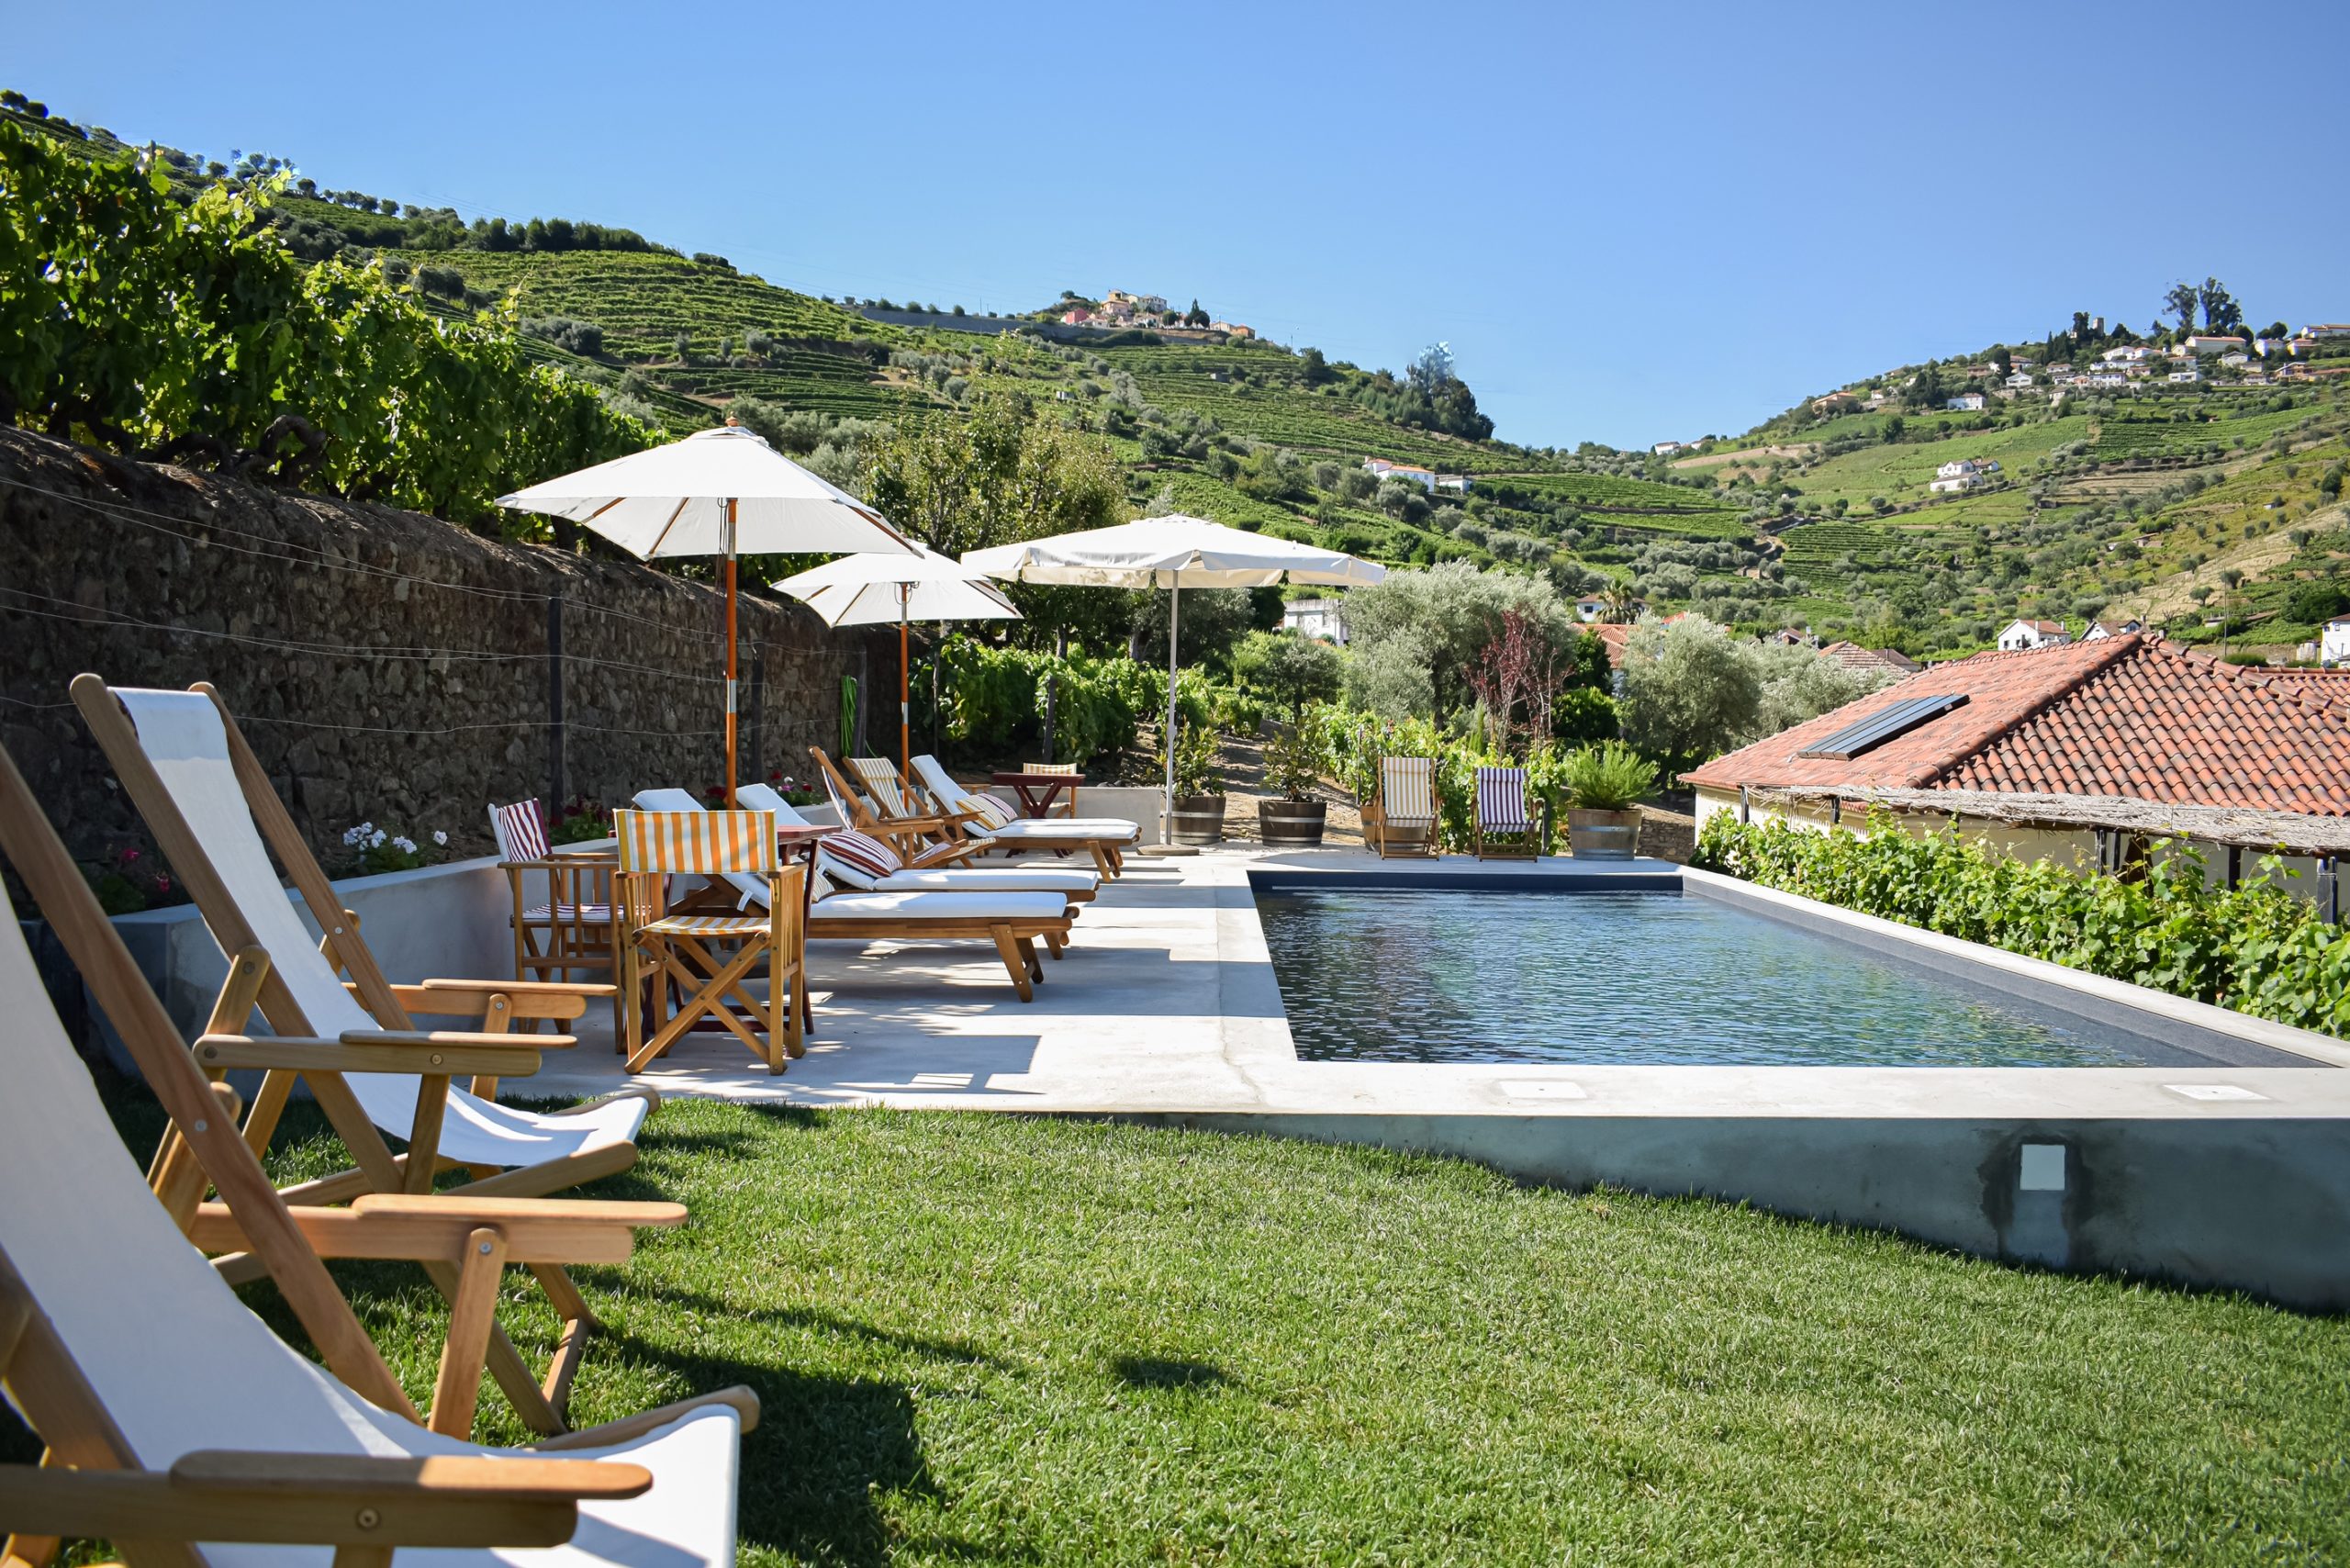 Be enchanted by the beauty, comfort and wines of Quinta da Casa Amarela